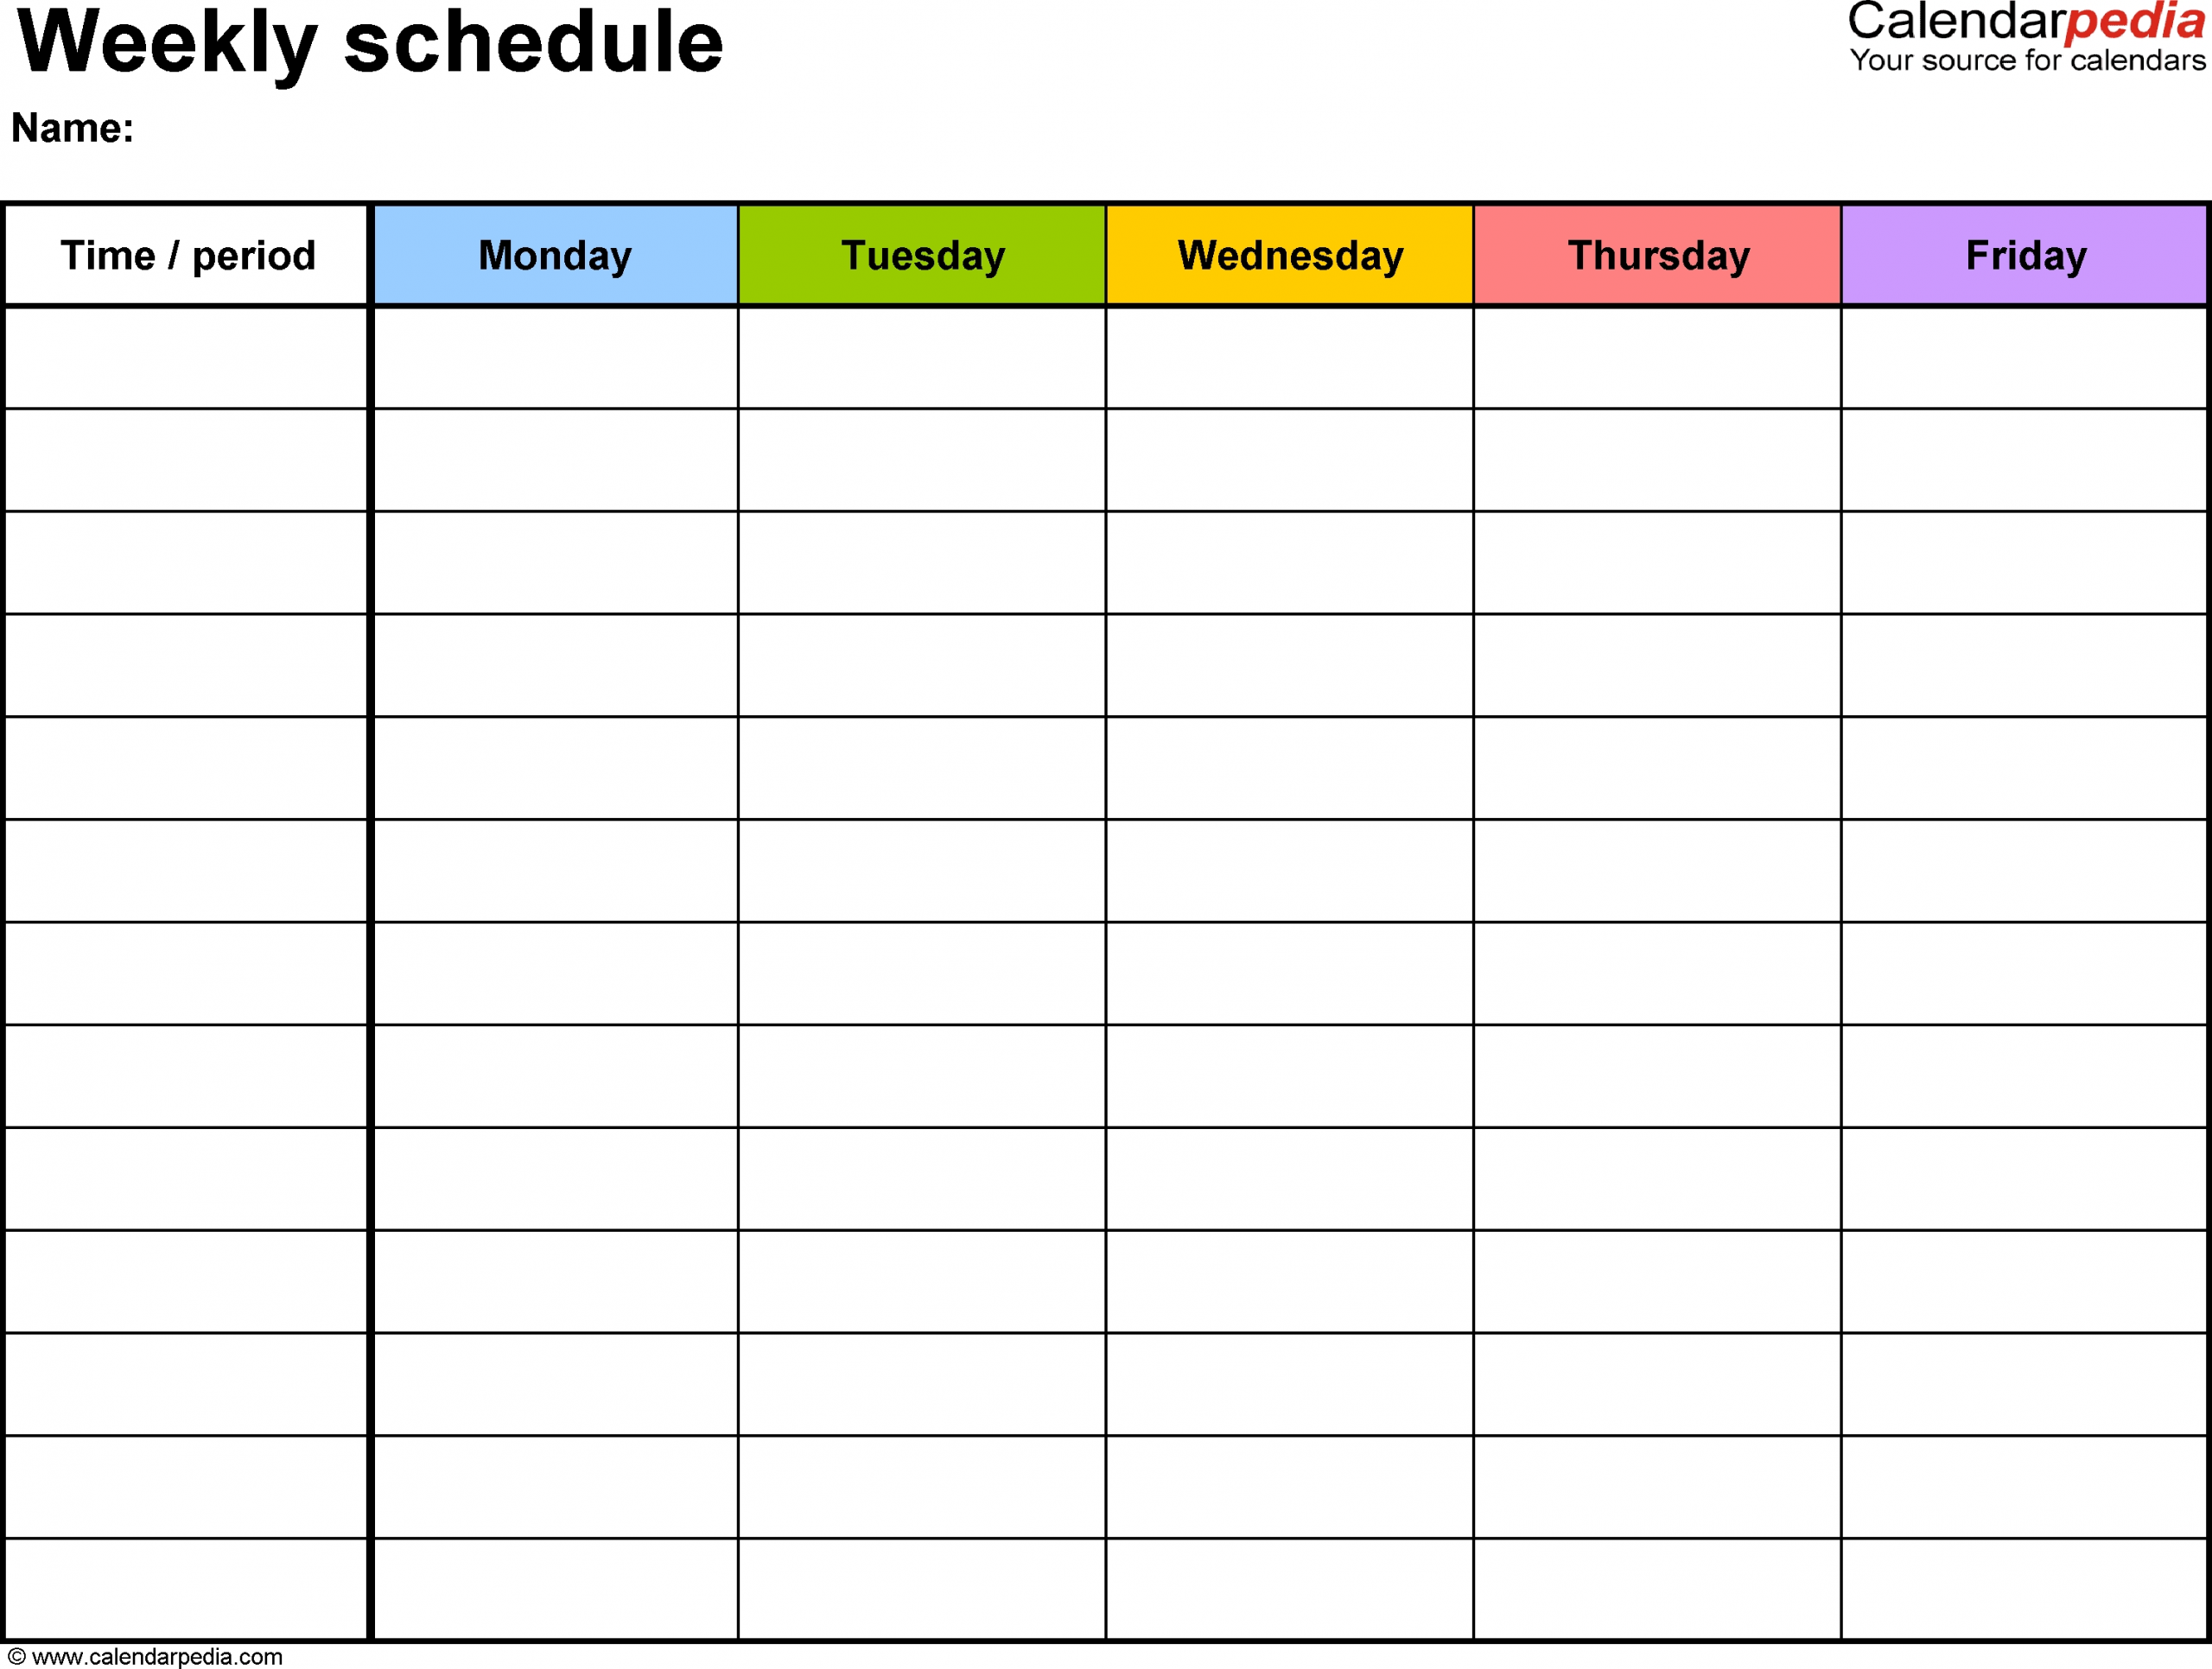 Free Weekly Schedule Templates For Pdf - 18 Templates in Printable Weekly Calendar With Top 5 For Week